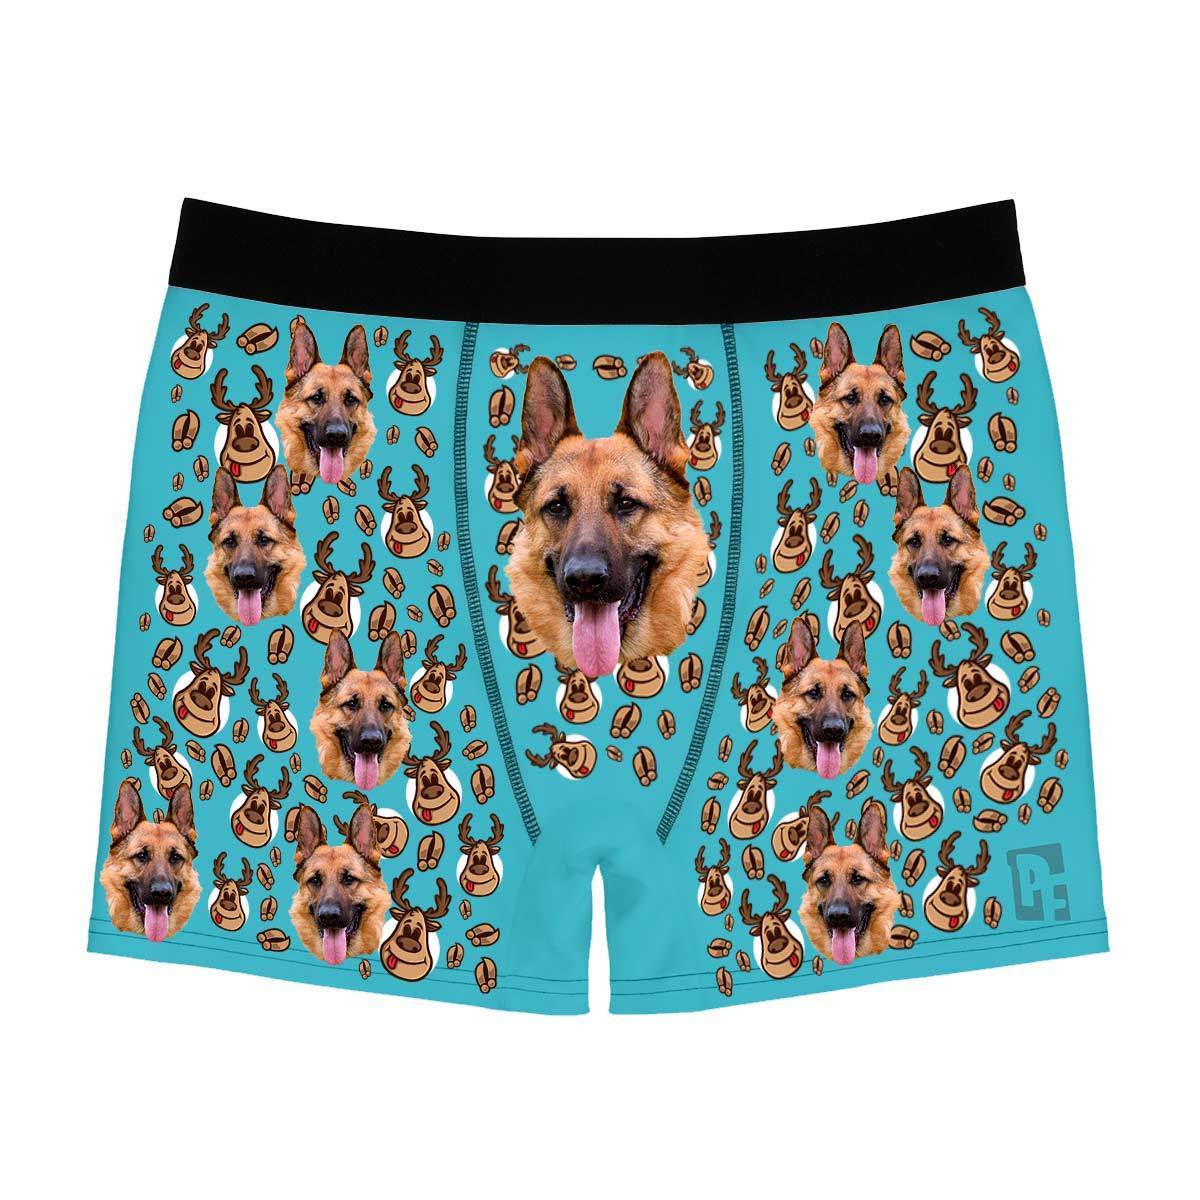 Blue Deer Hunter men's boxer briefs personalized with photo printed on them